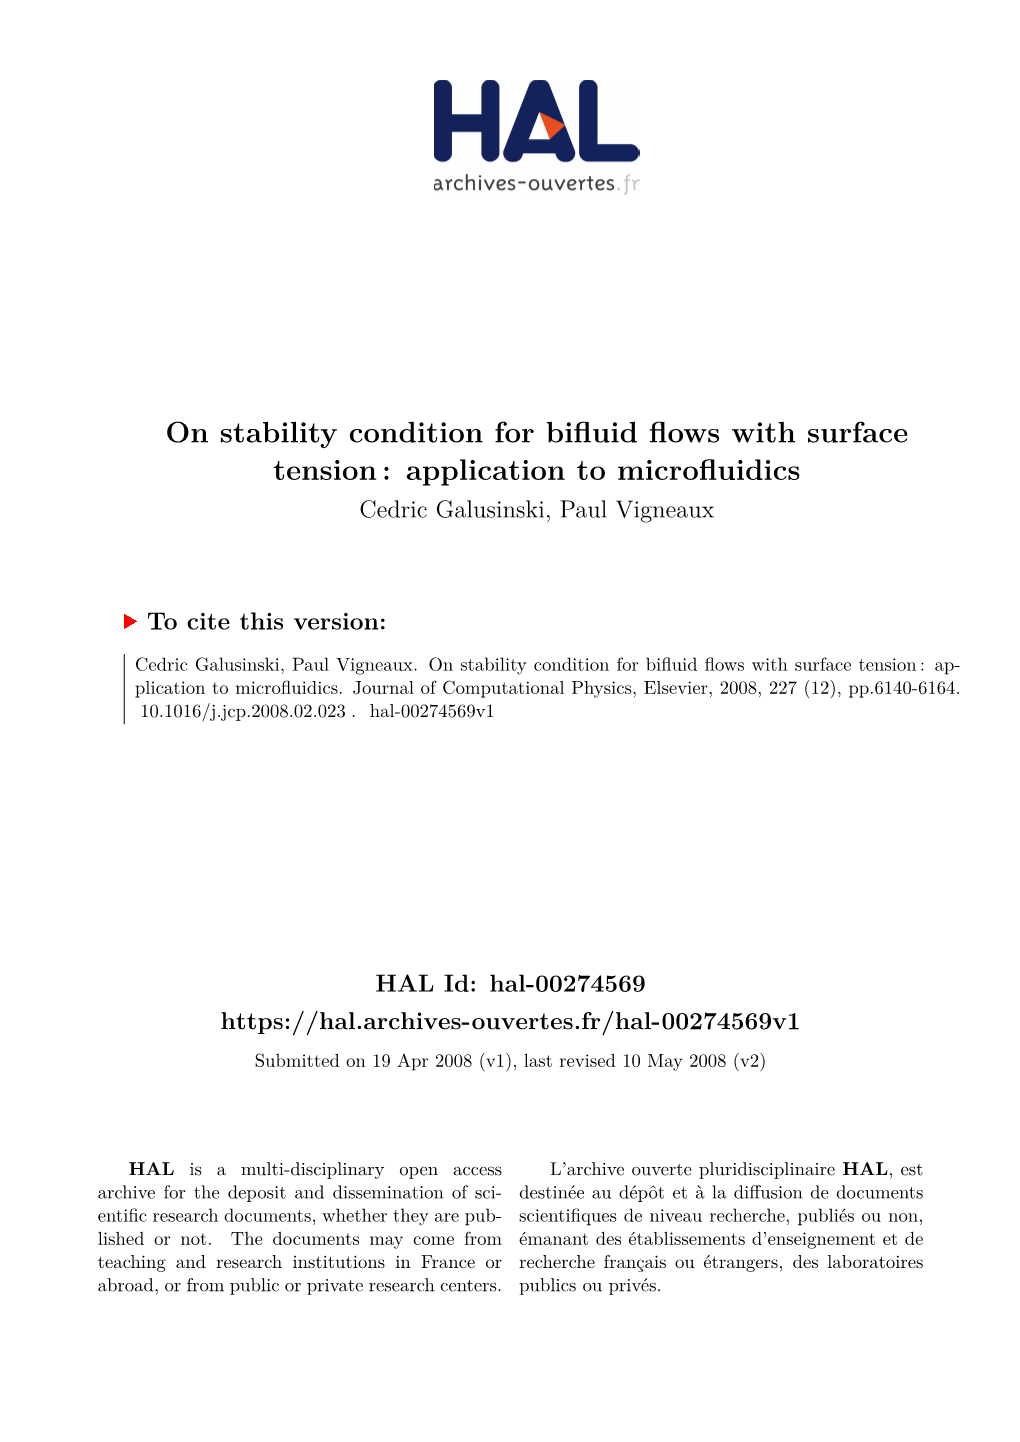 On Stability Condition for Bifluid Flows with Surface Tension: Application to Microfluidics